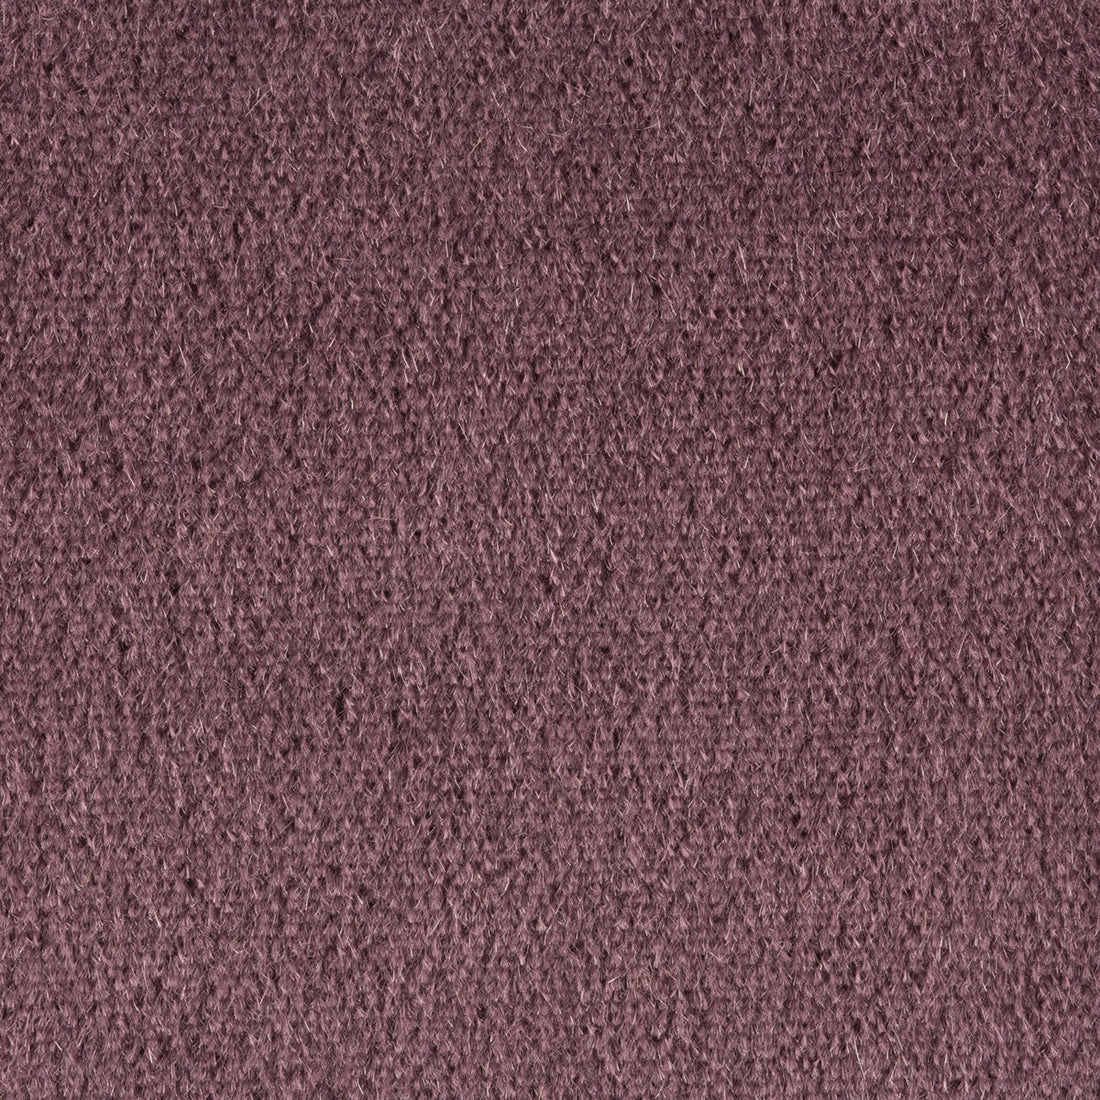 Autun Mohair Velvet fabric in prune color - pattern BR-89778.768.0 - by Brunschwig &amp; Fils